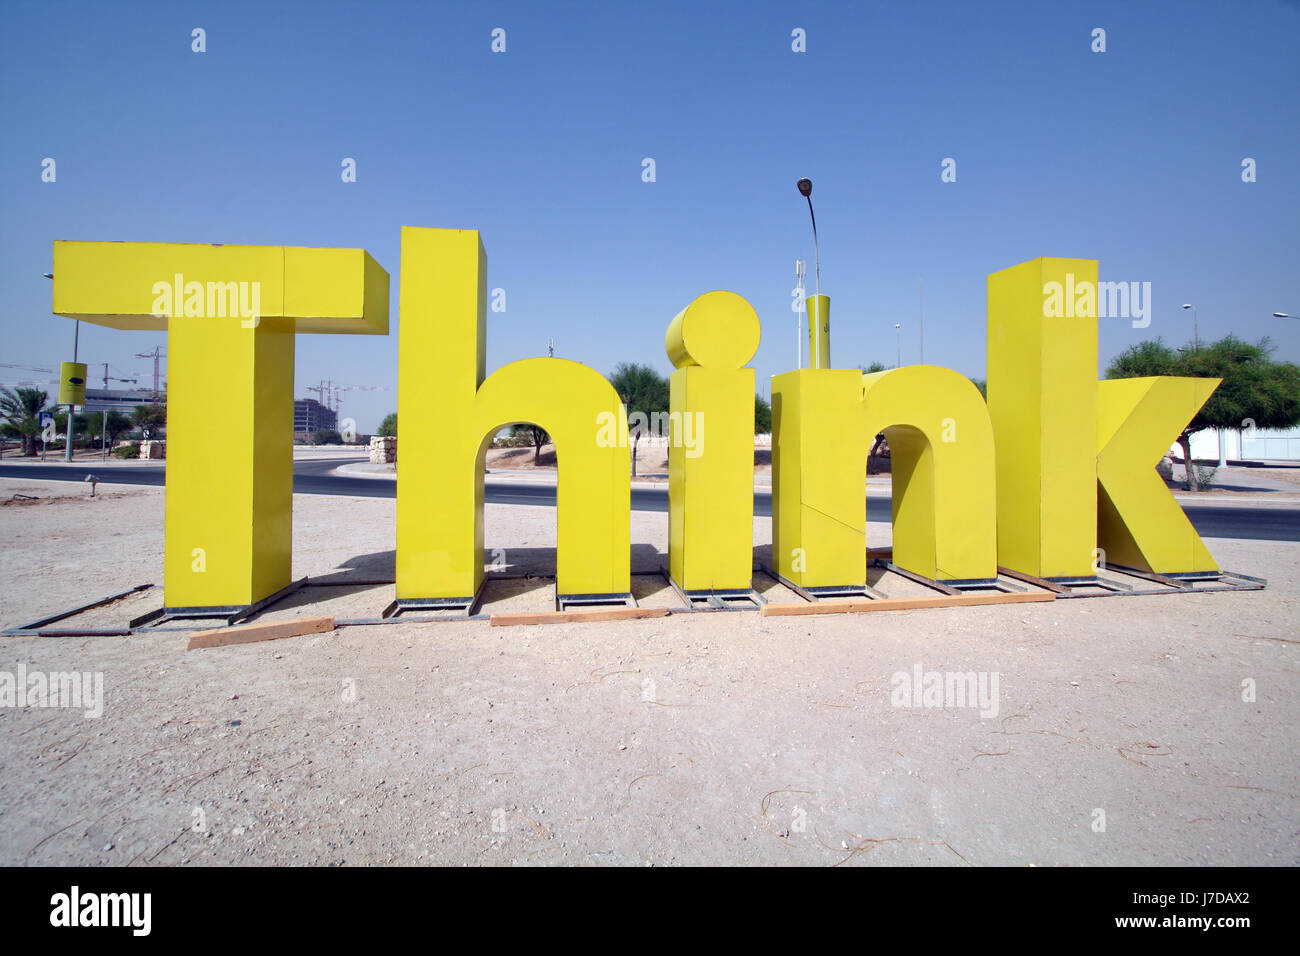 Exhortatory sign urging 'Think' on the campus of Education City, Doha, Qatar Stock Photo